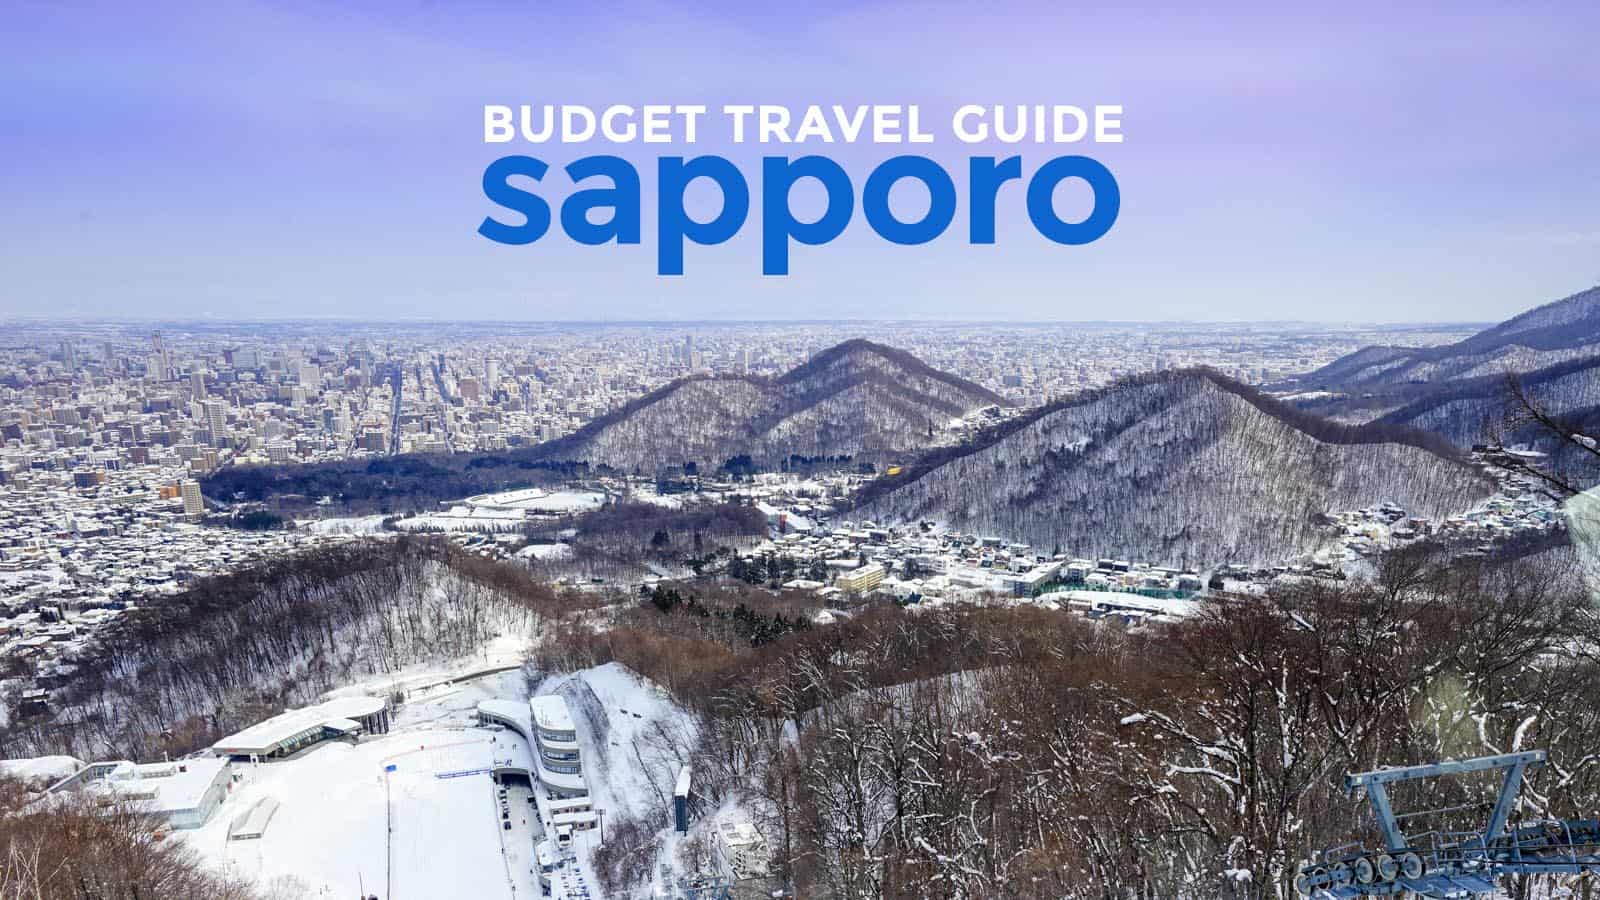 Sapporo On A Budget Travel Guide Itinerary The Poor Traveler Itinerary Blog